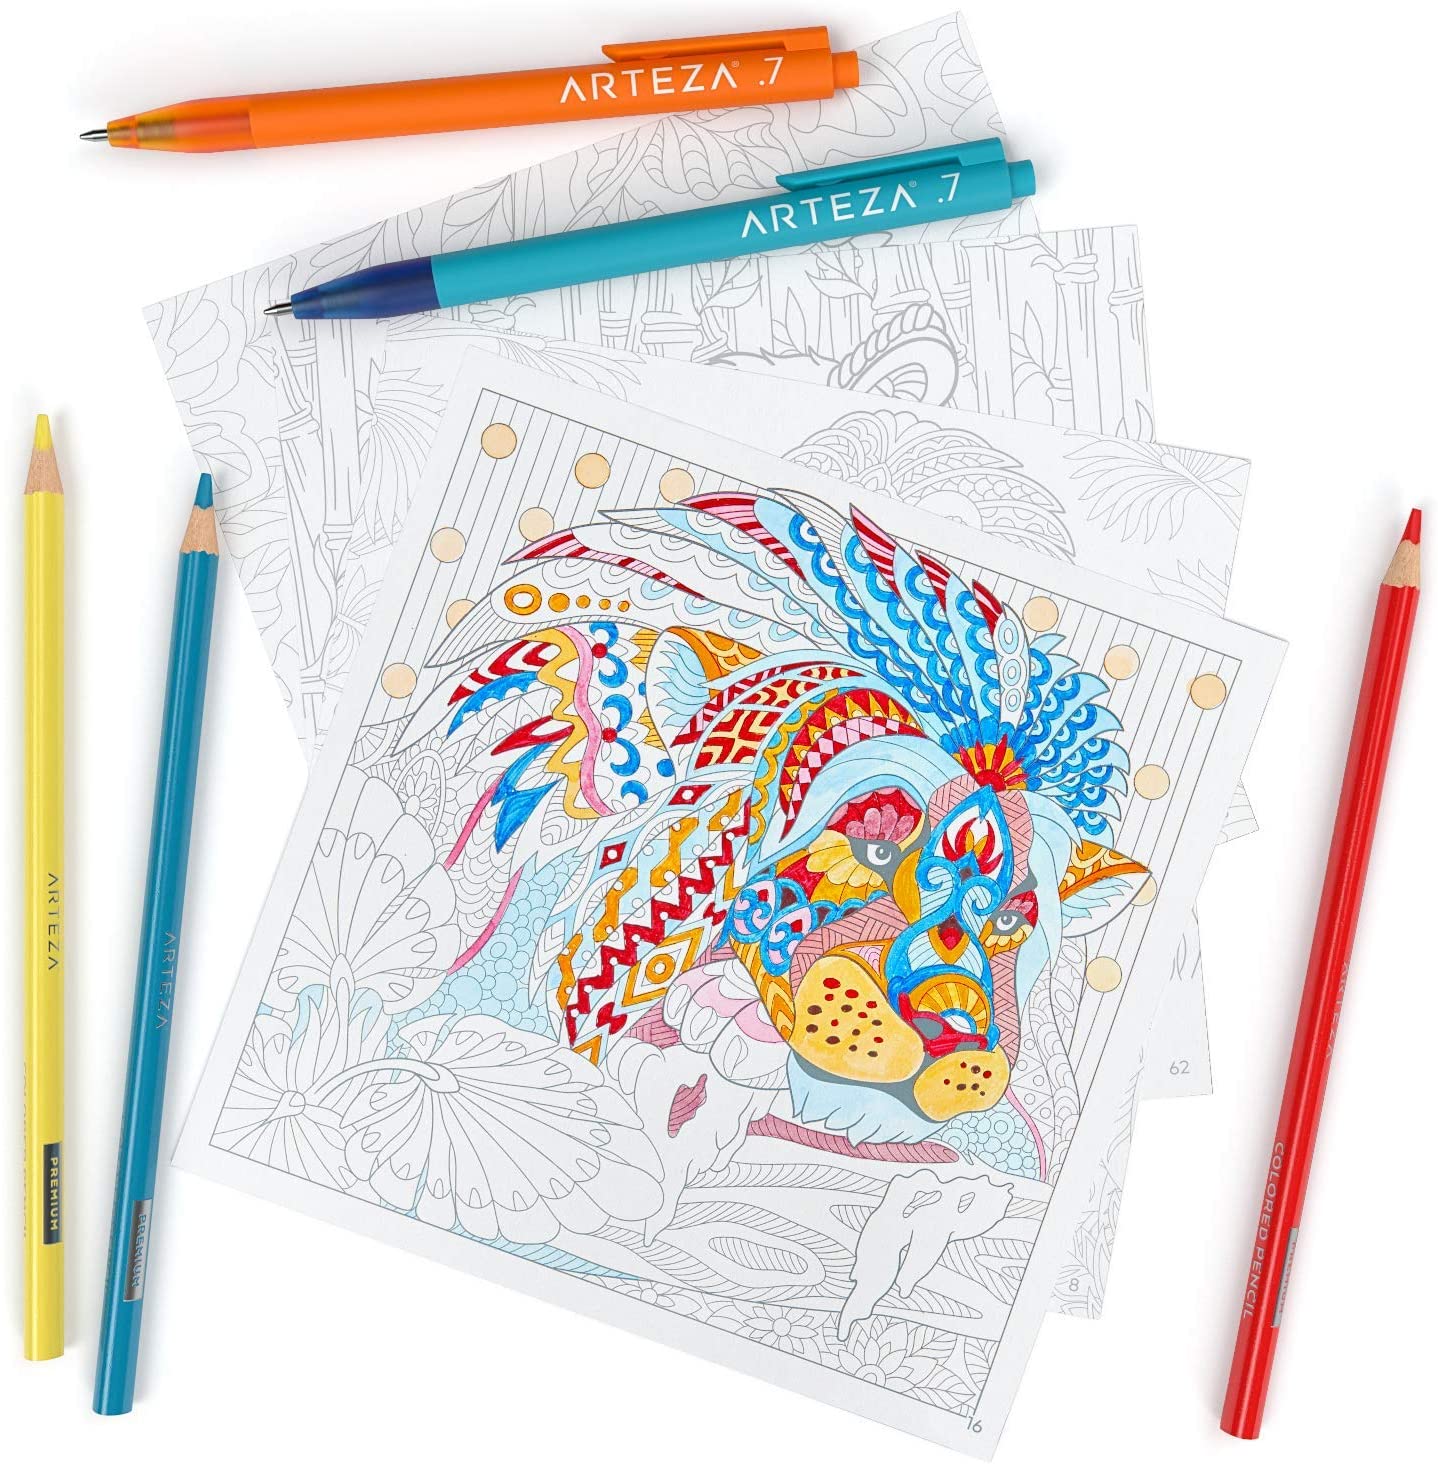 Using Arteza Expert Colored Pencils for Adult Coloring - by Anna Grunduls